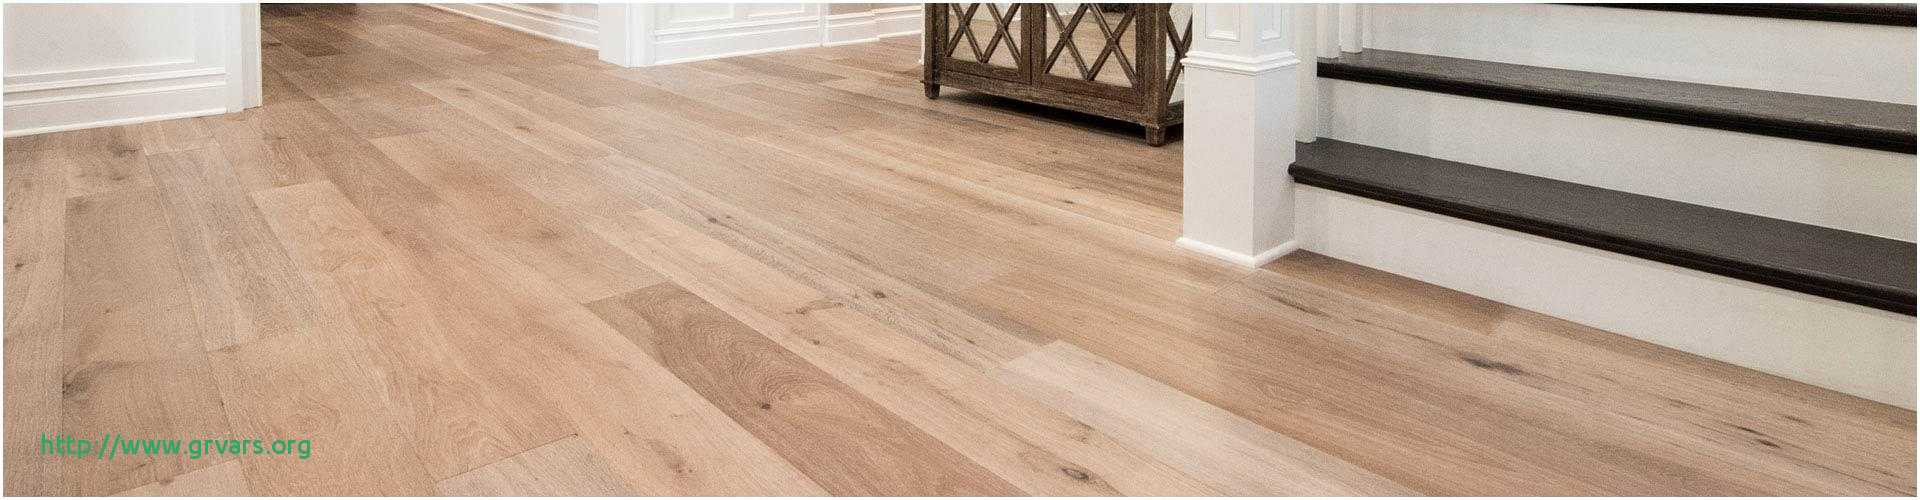 17 Fabulous Bruce solid Hardwood Flooring Reviews 2024 free download bruce solid hardwood flooring reviews of 20 impressionnant where to buy bruce hardwood floor cleaner ideas blog throughout living room lovely bruce hardwood floor cleaner bruce hardwood floo